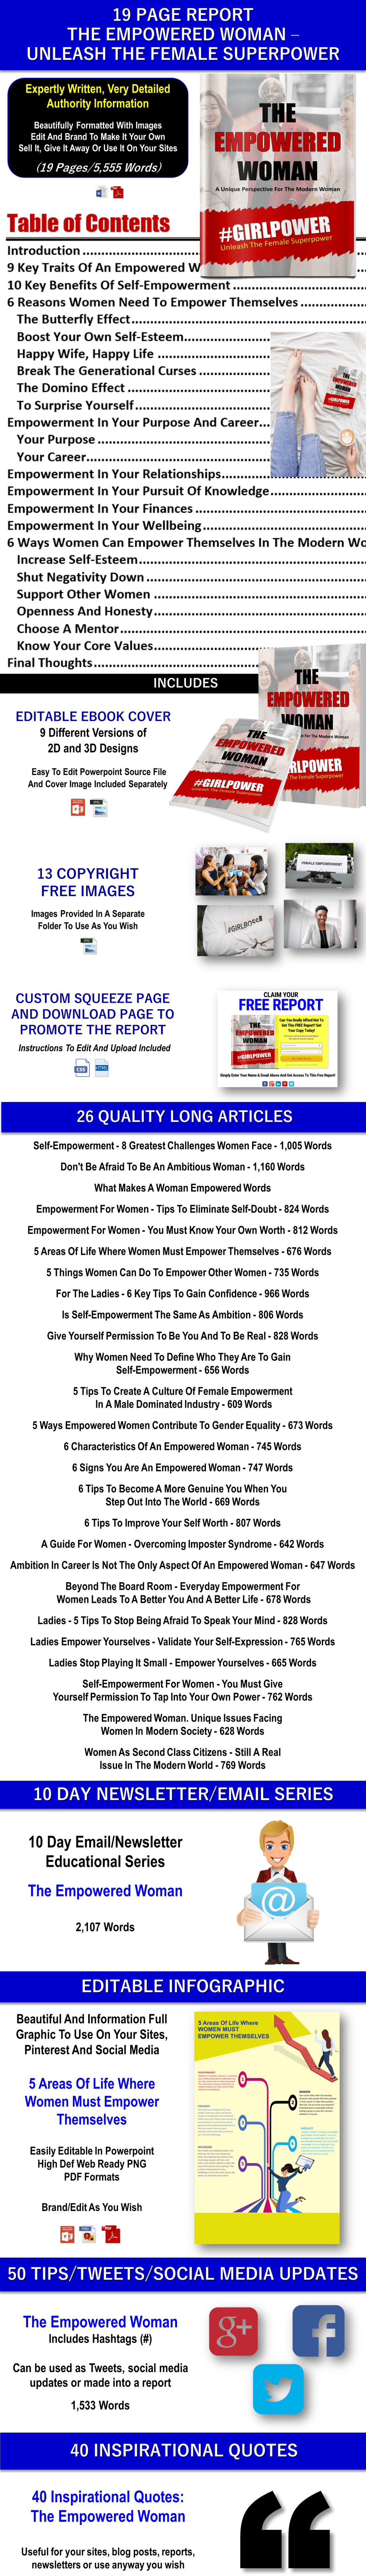 THE EMPOWERED WOMAN content - PLR Rights